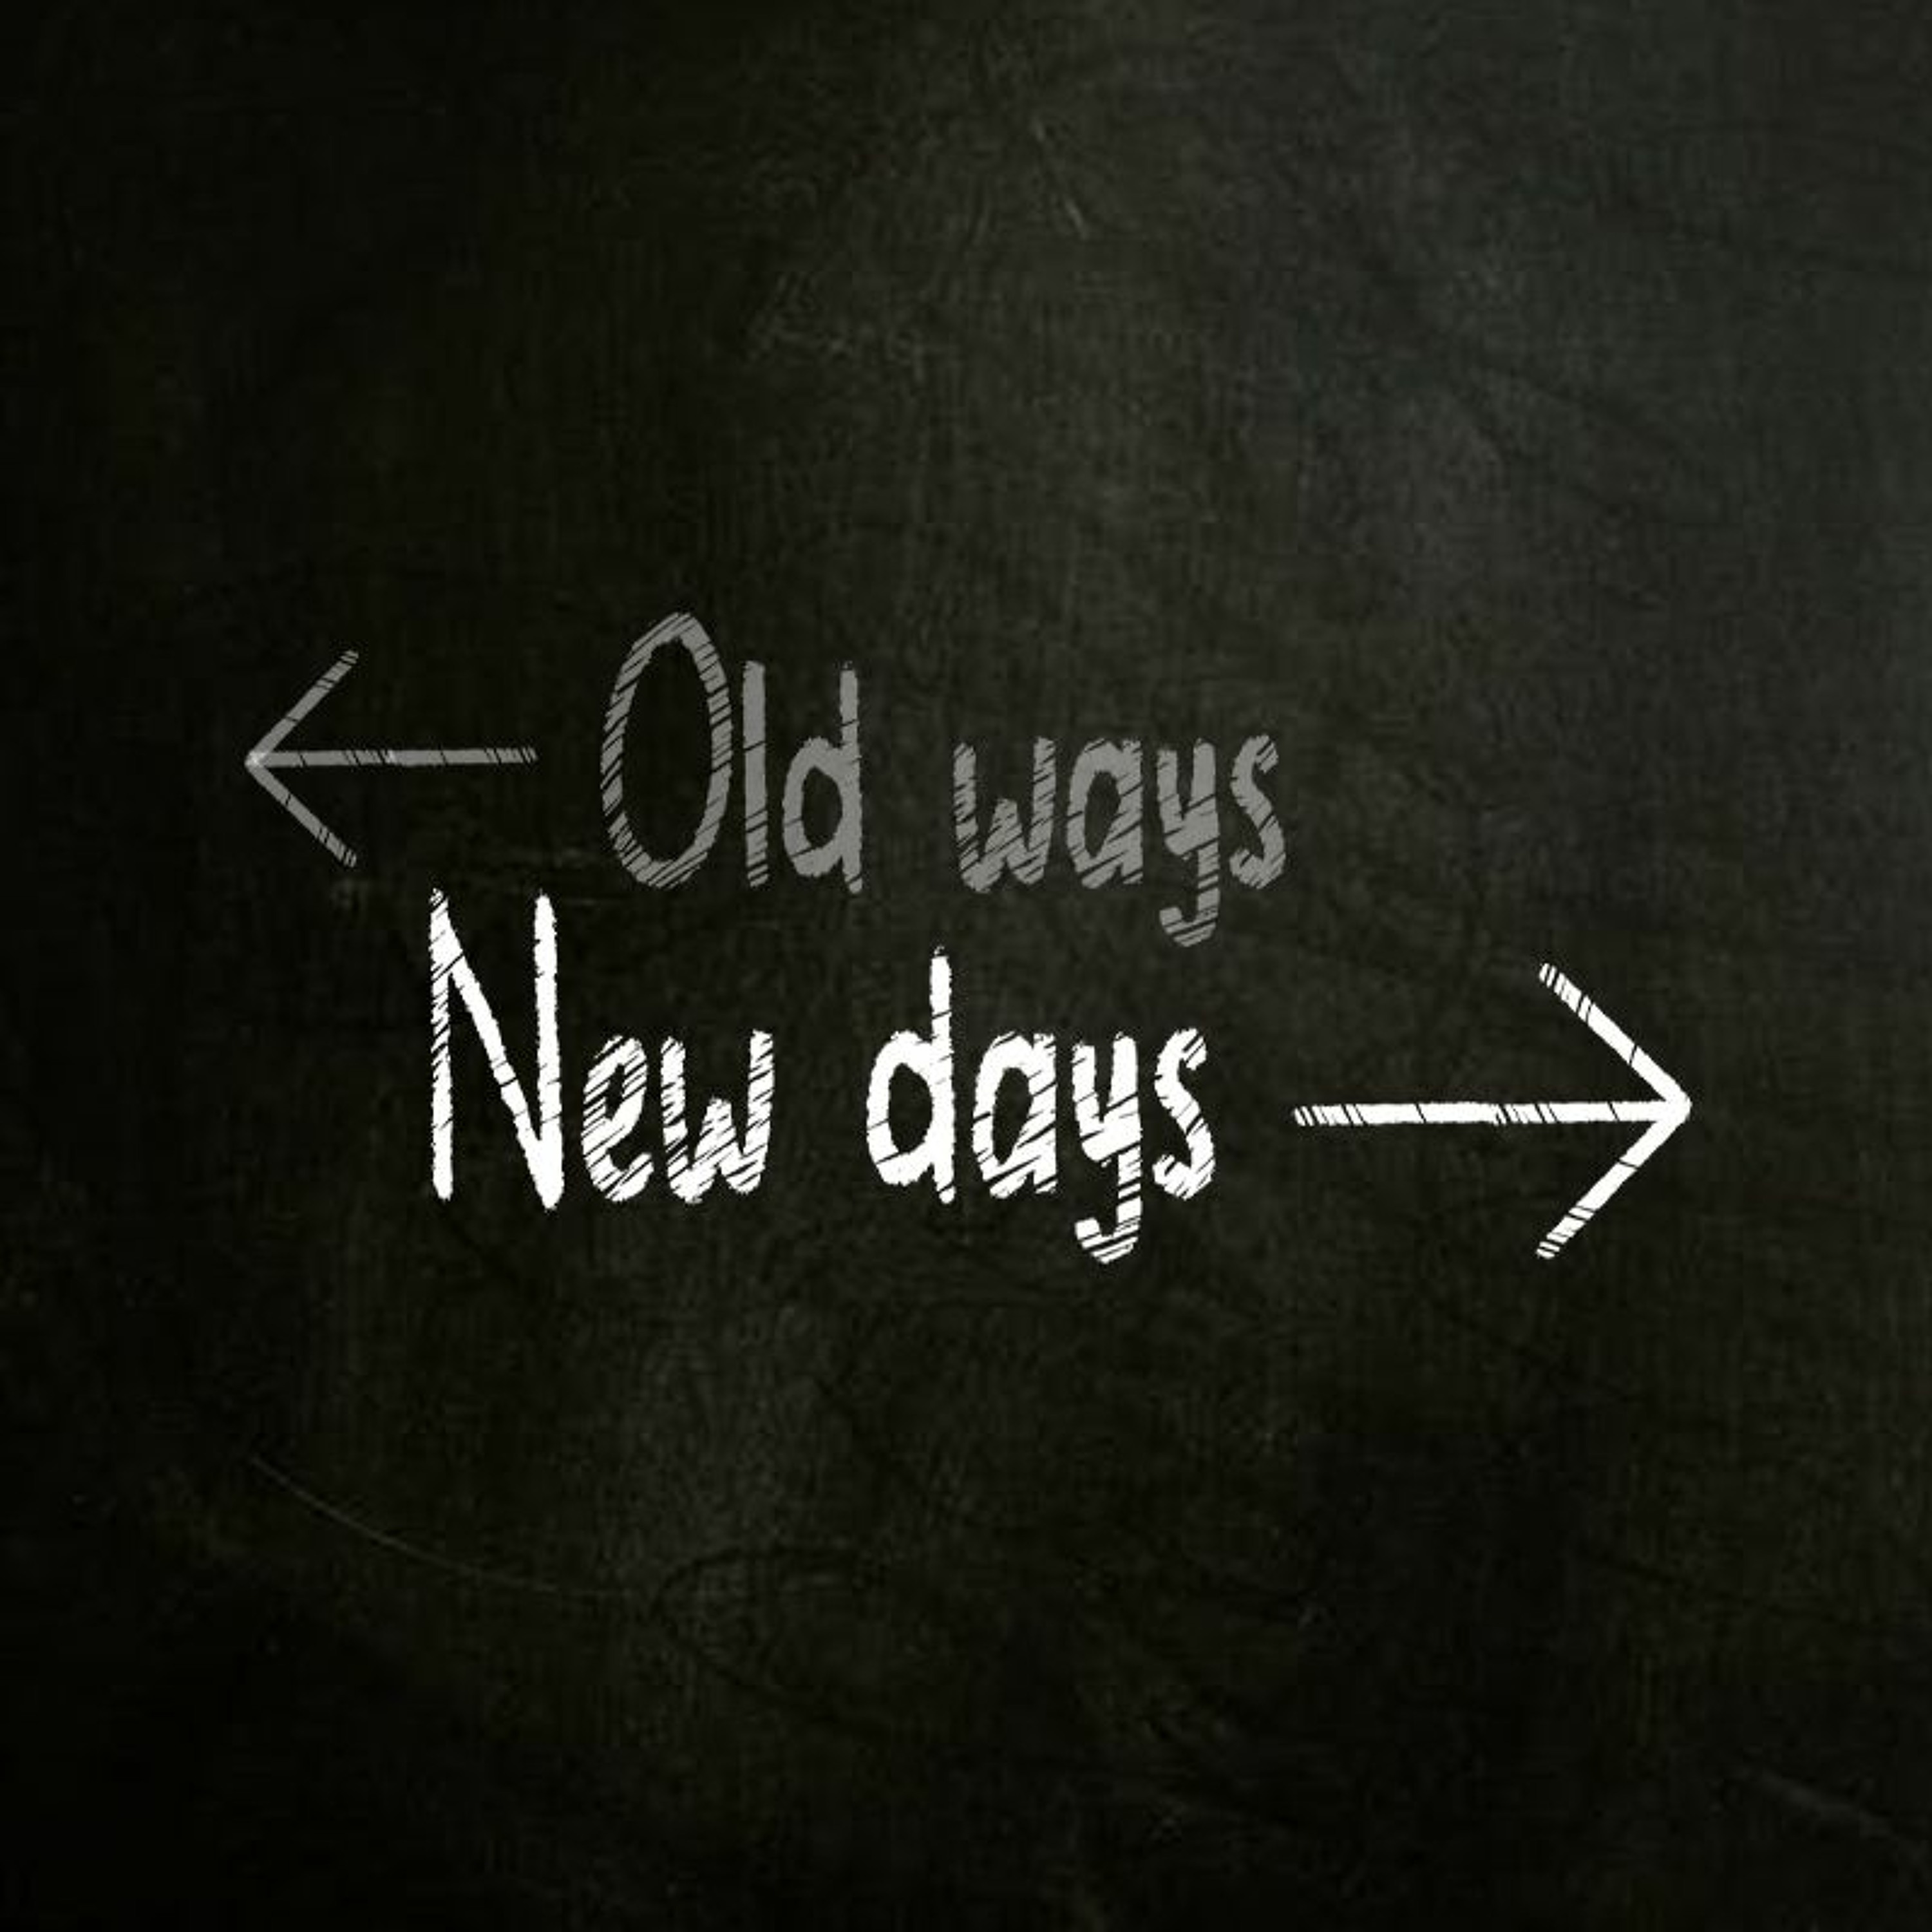 Old ways new days | The character of God